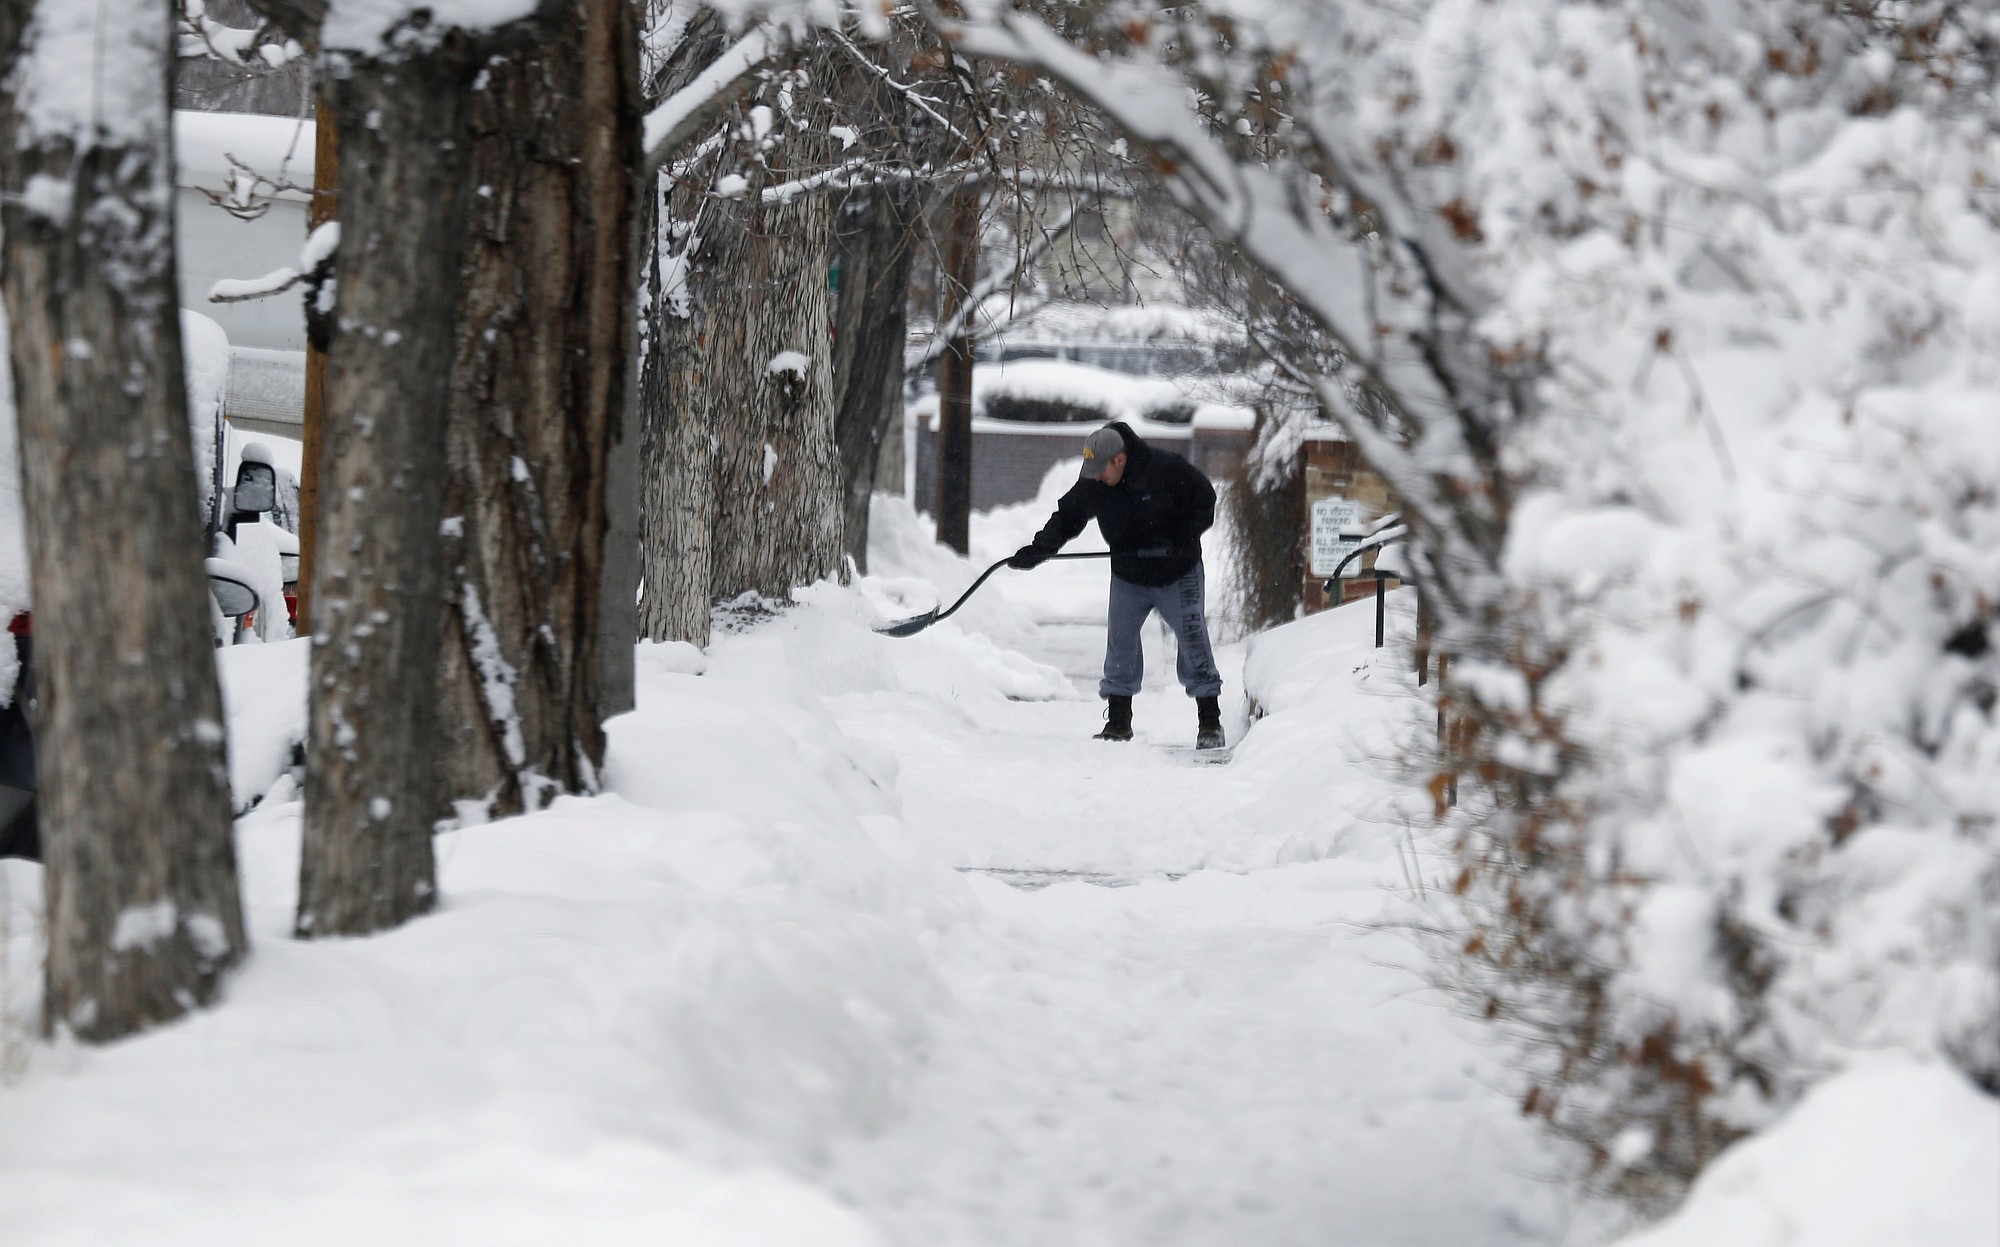 Framed by trees, a shoveler toils on a sidewalk after a winter storm sent temperatures plunging to single-digit levels and dumped up to a foot of snow Sunday in Denver.